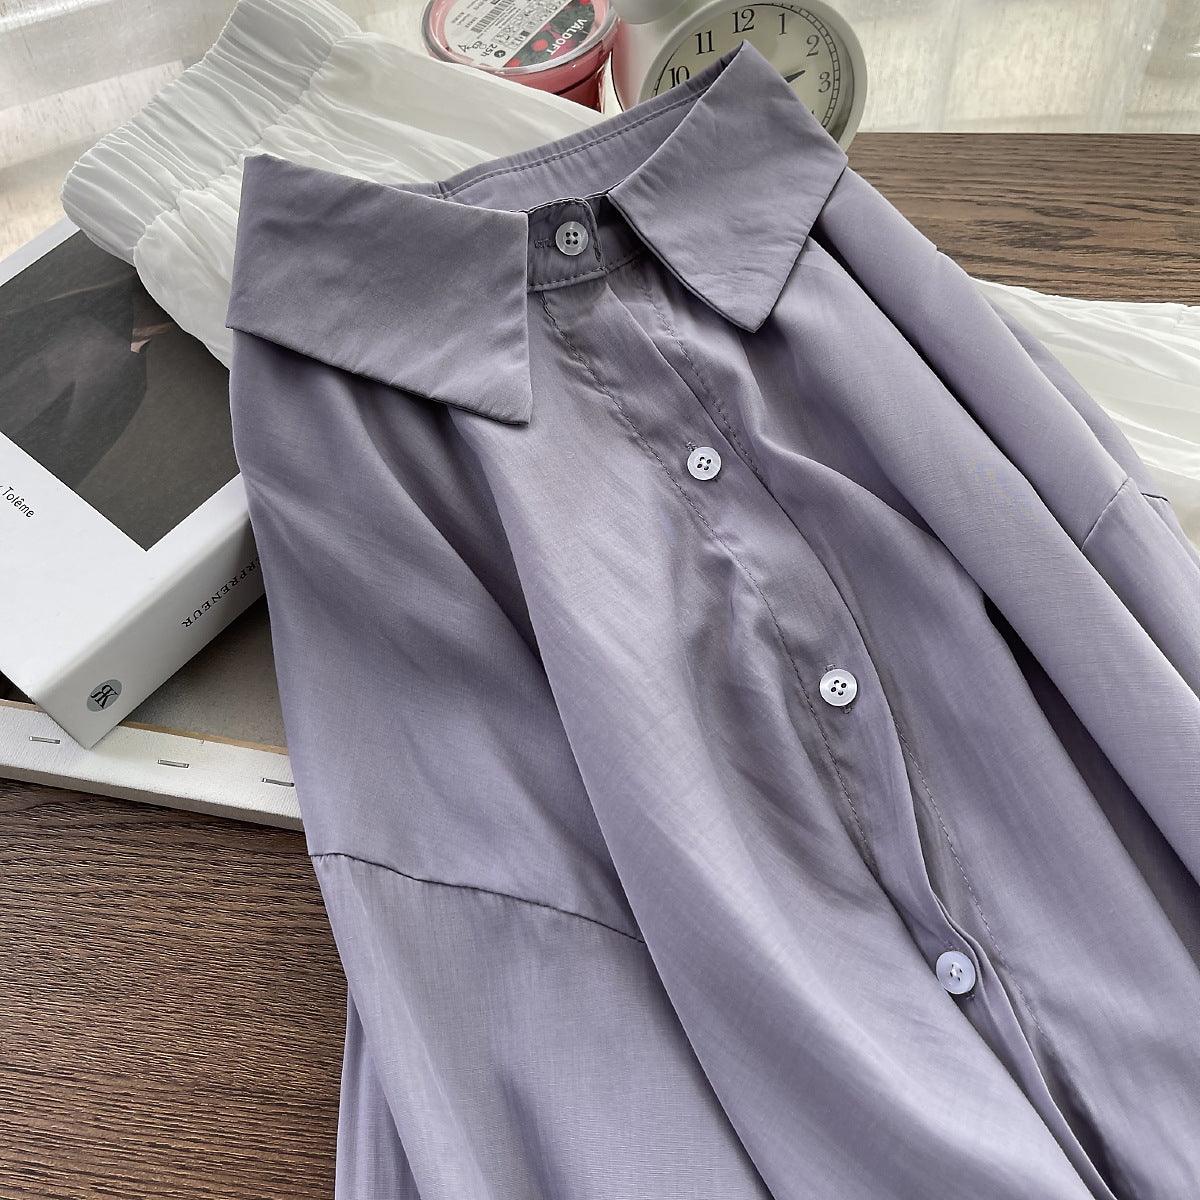 Women's Solid Color Button Down Shirt with Long Sleeves -